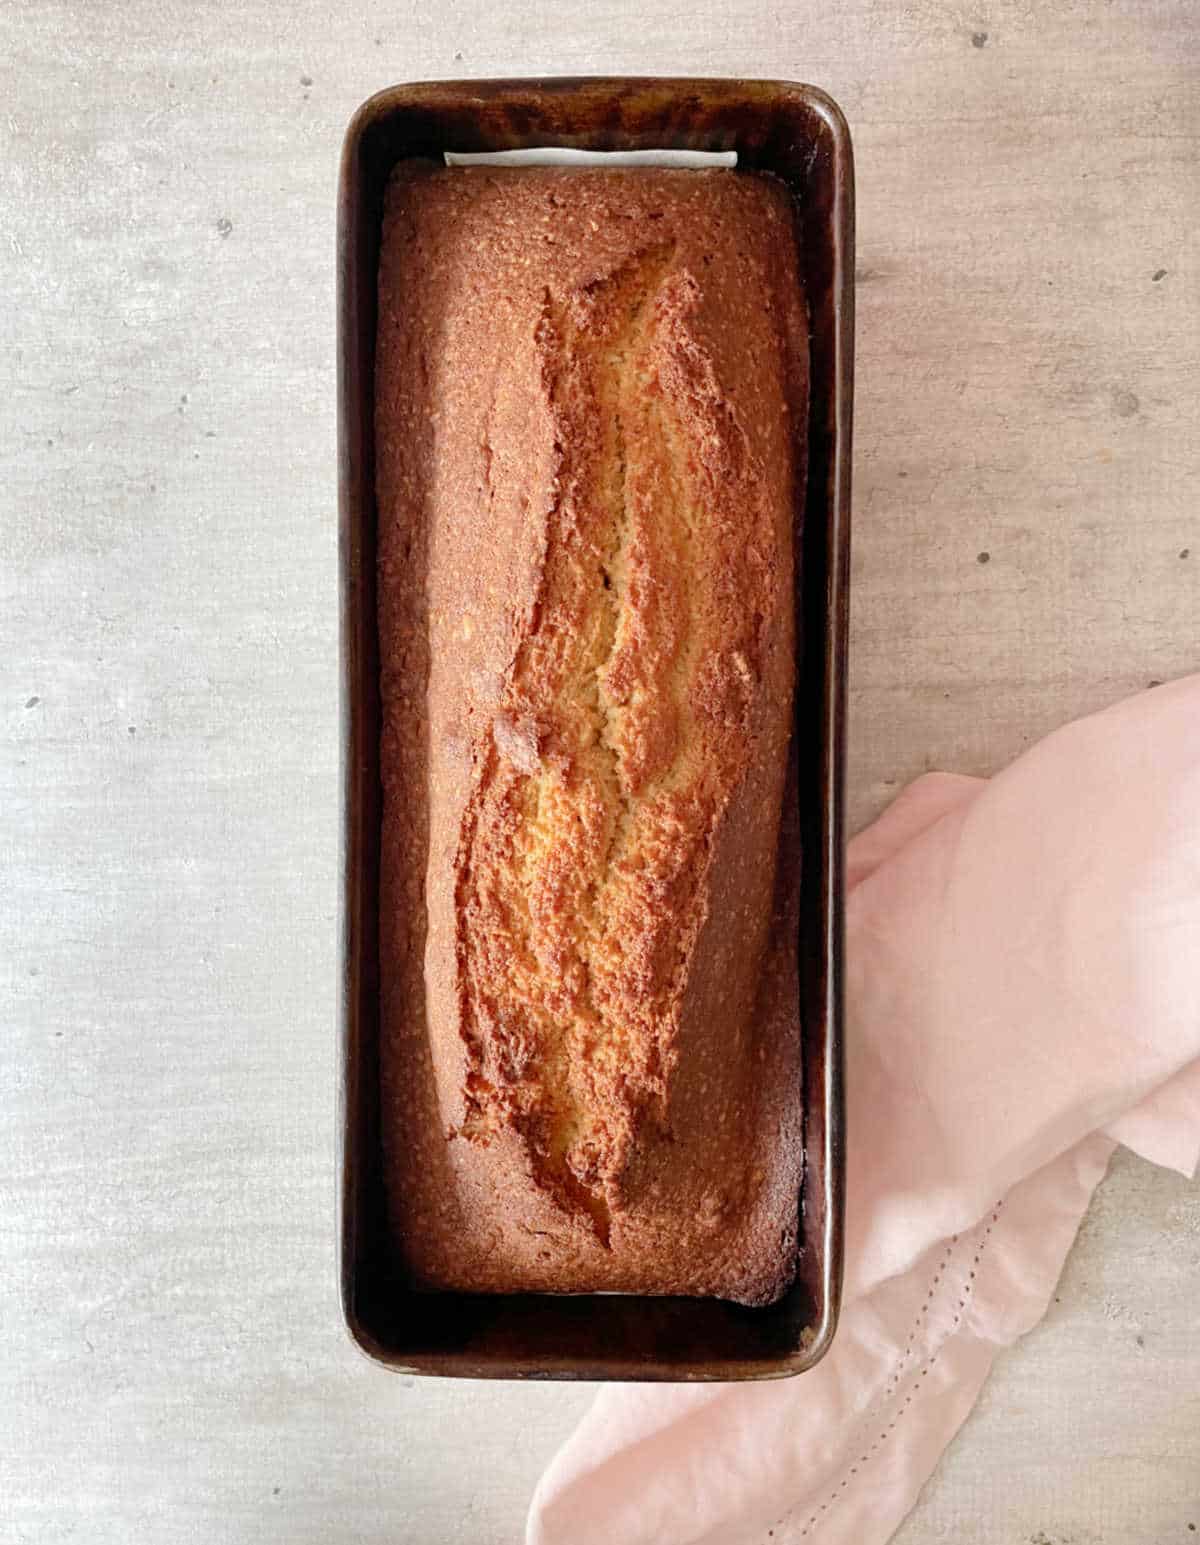 Baked hazelnut loaf cake in a dark metal pan on a grey surface with a pink cloth.